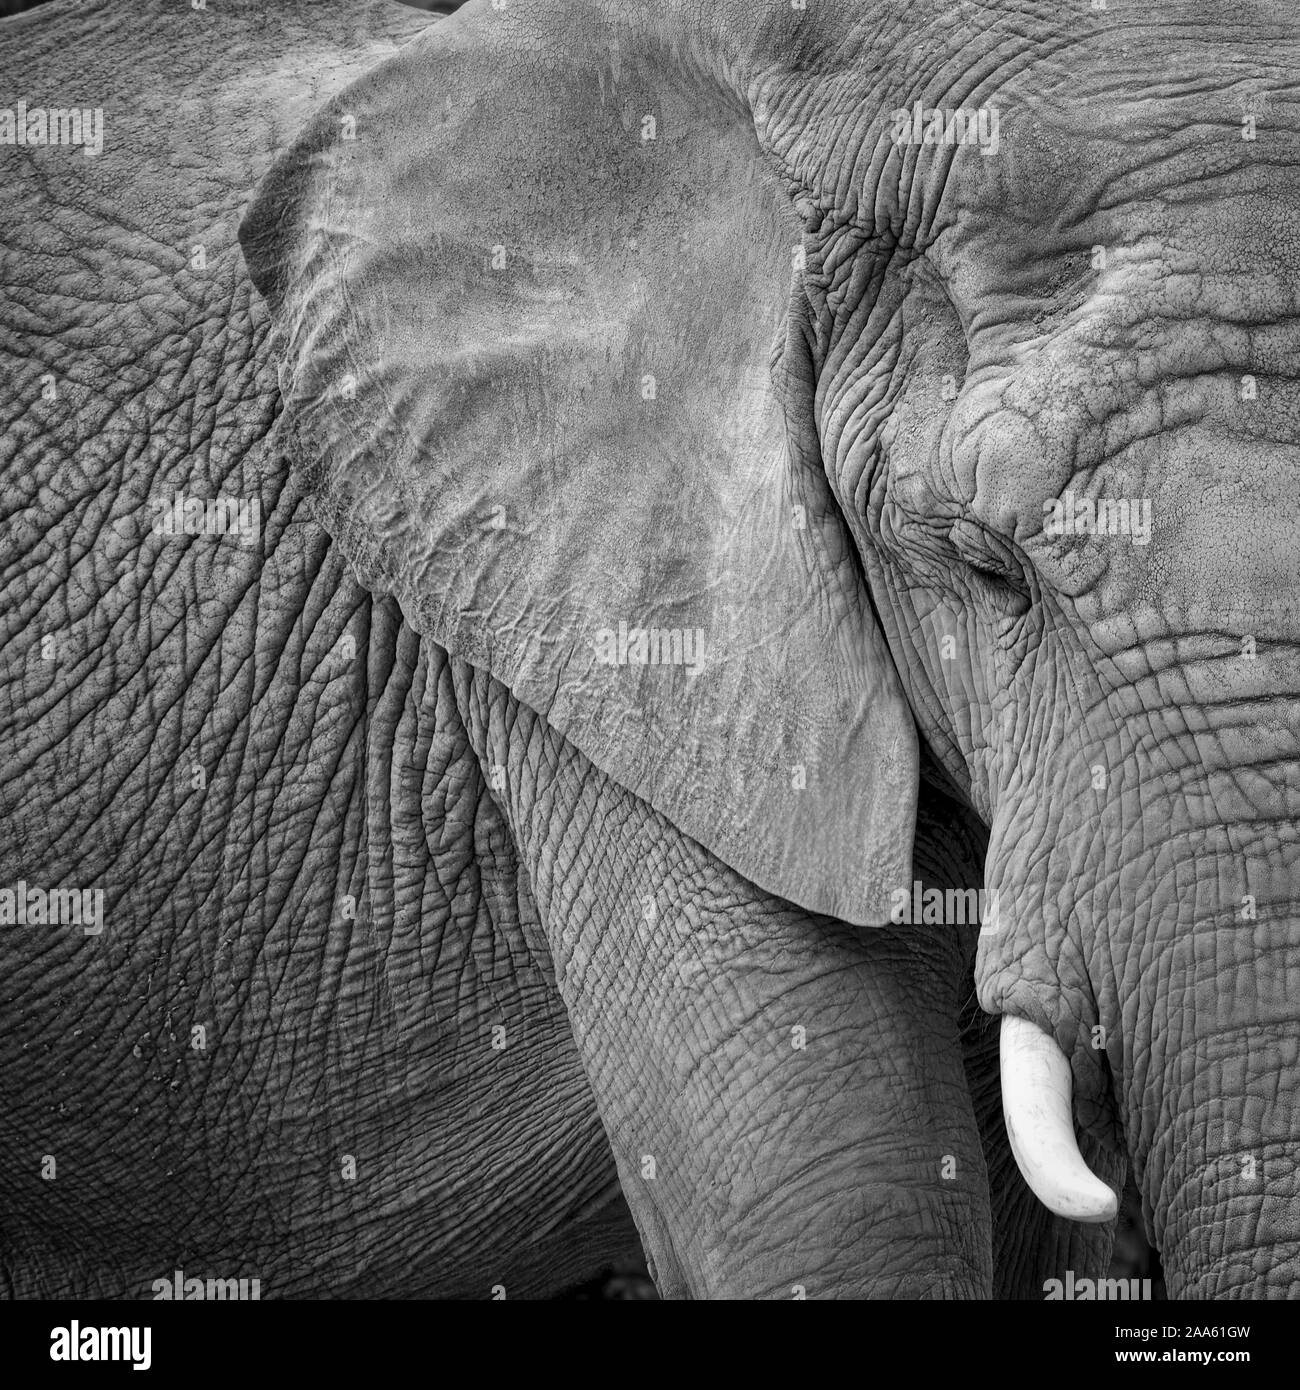 Emotional african elephant black and white portrait. Up close shot of partial profile, face, and body. Frame filling loxodona africana. Emotional anim Stock Photo